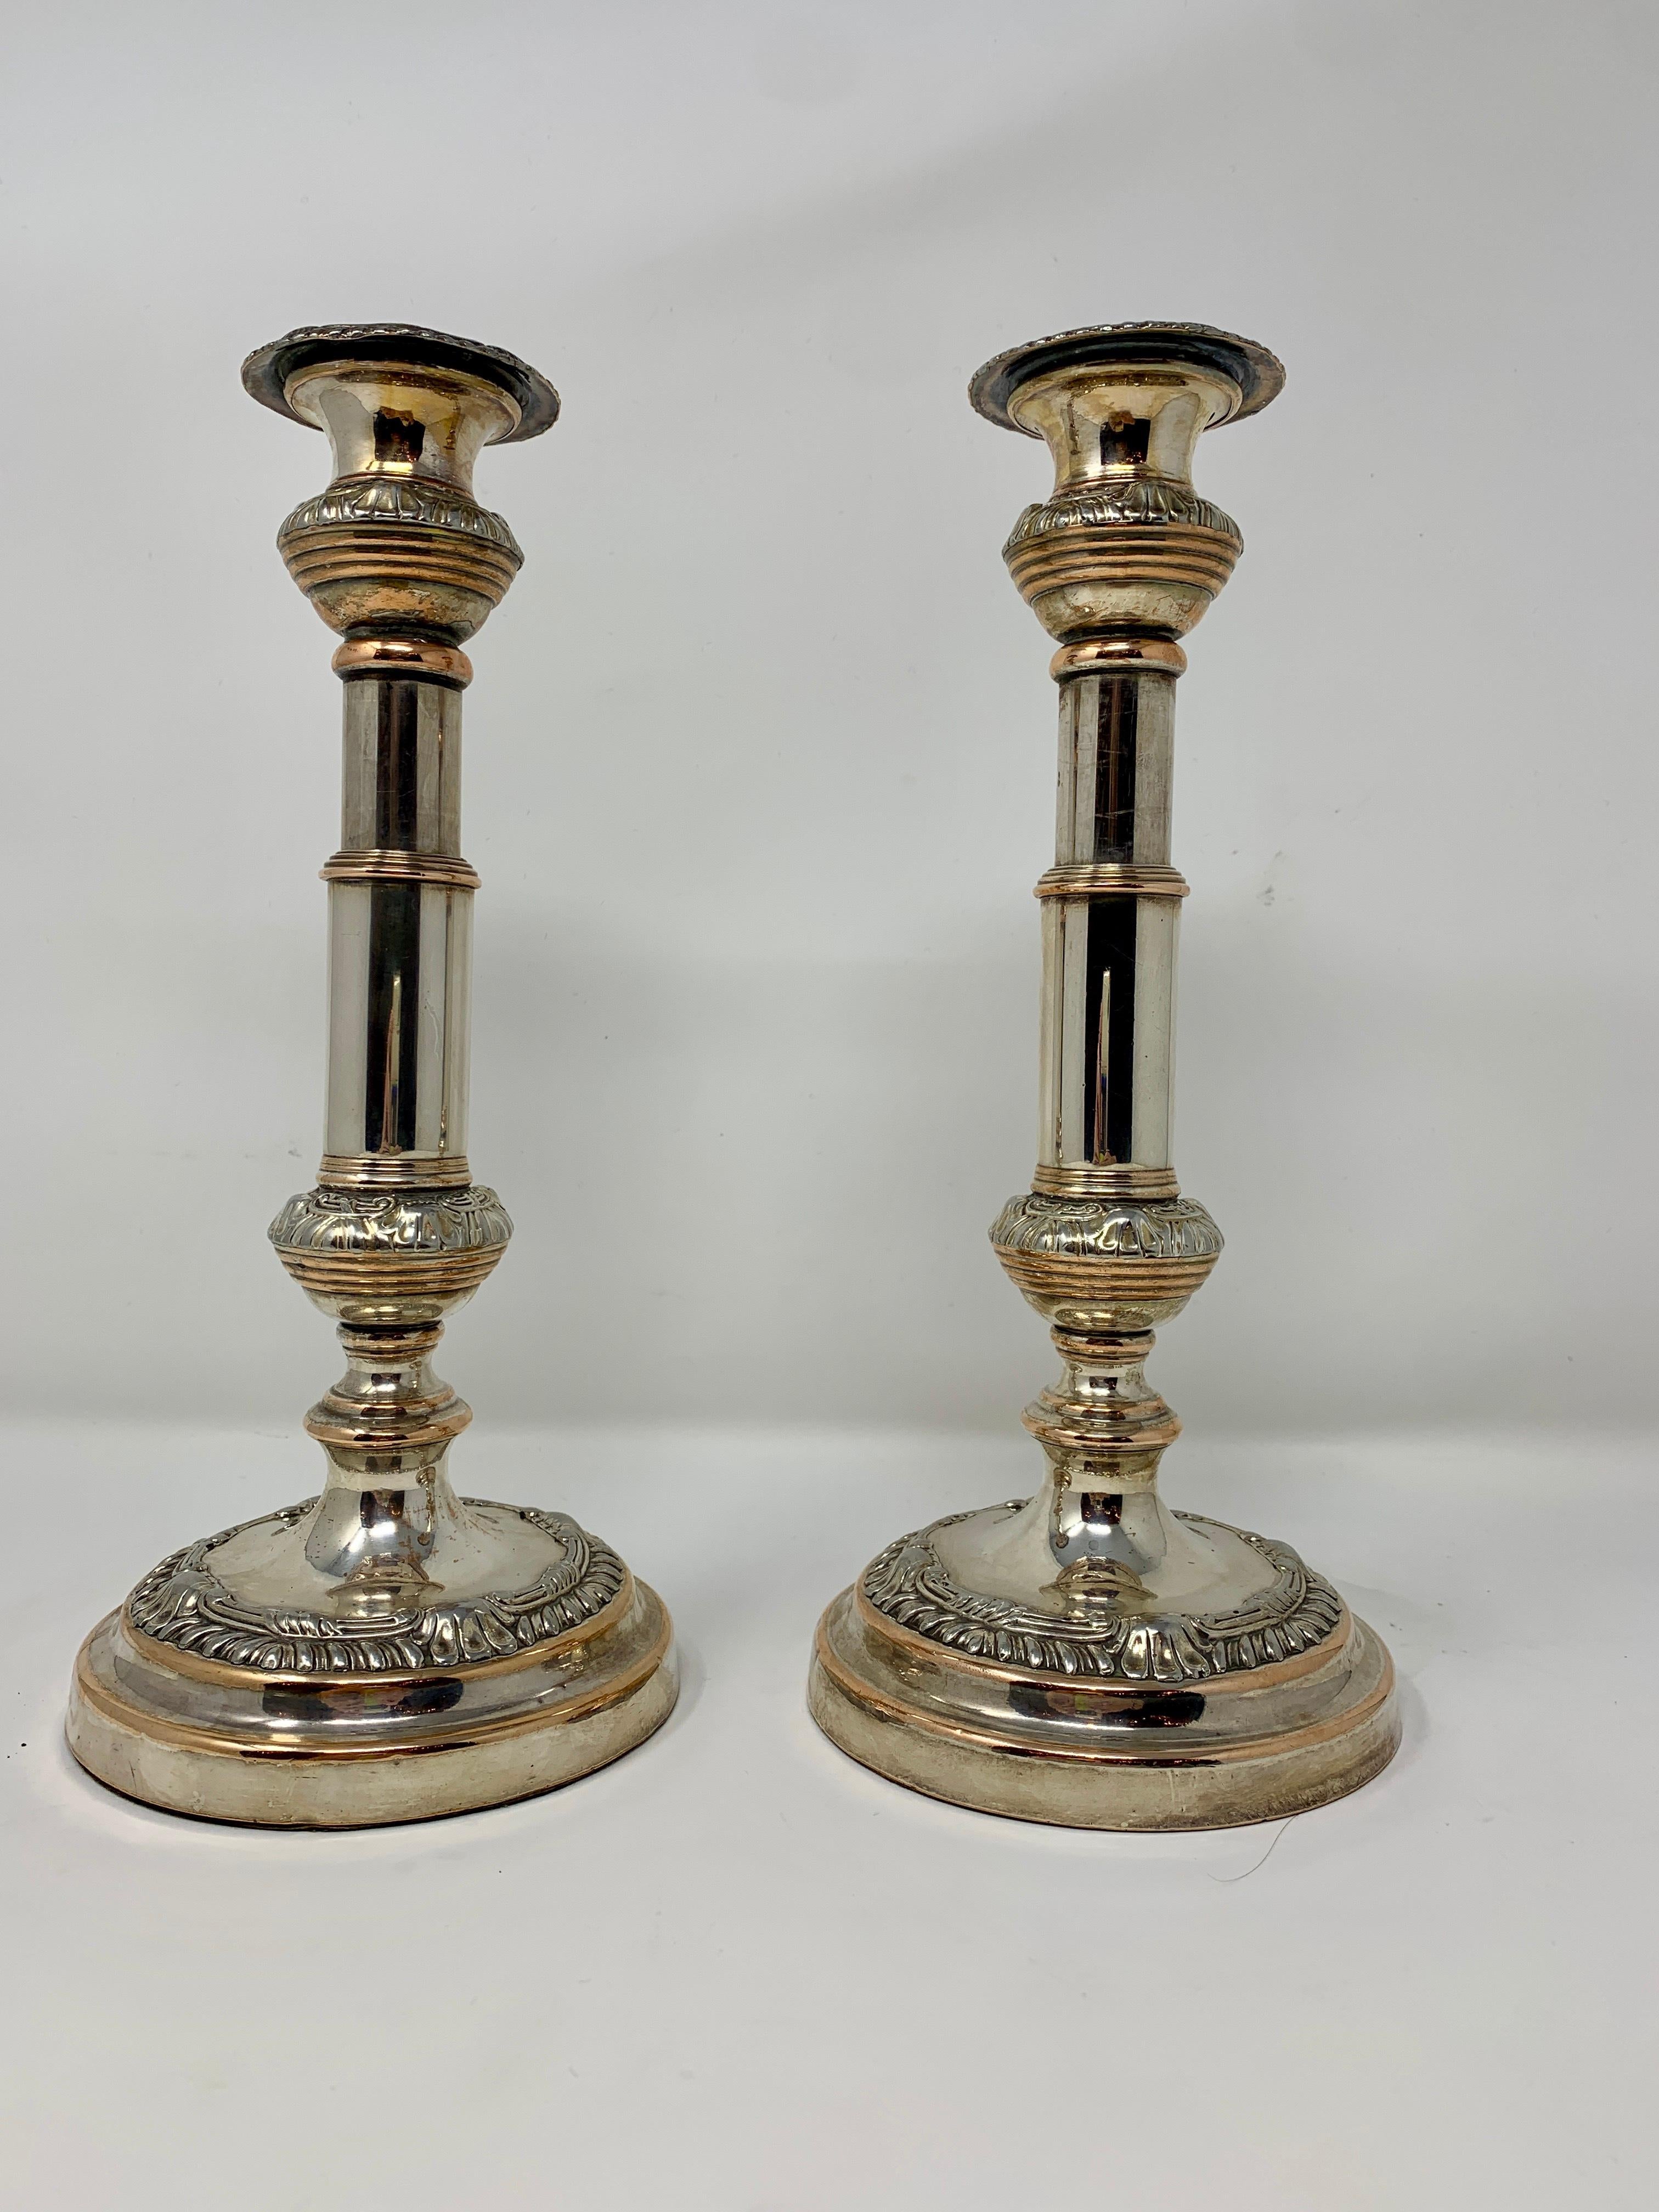 These telescoping candlesticks are sure to engender discussion when you use them in your home.
 